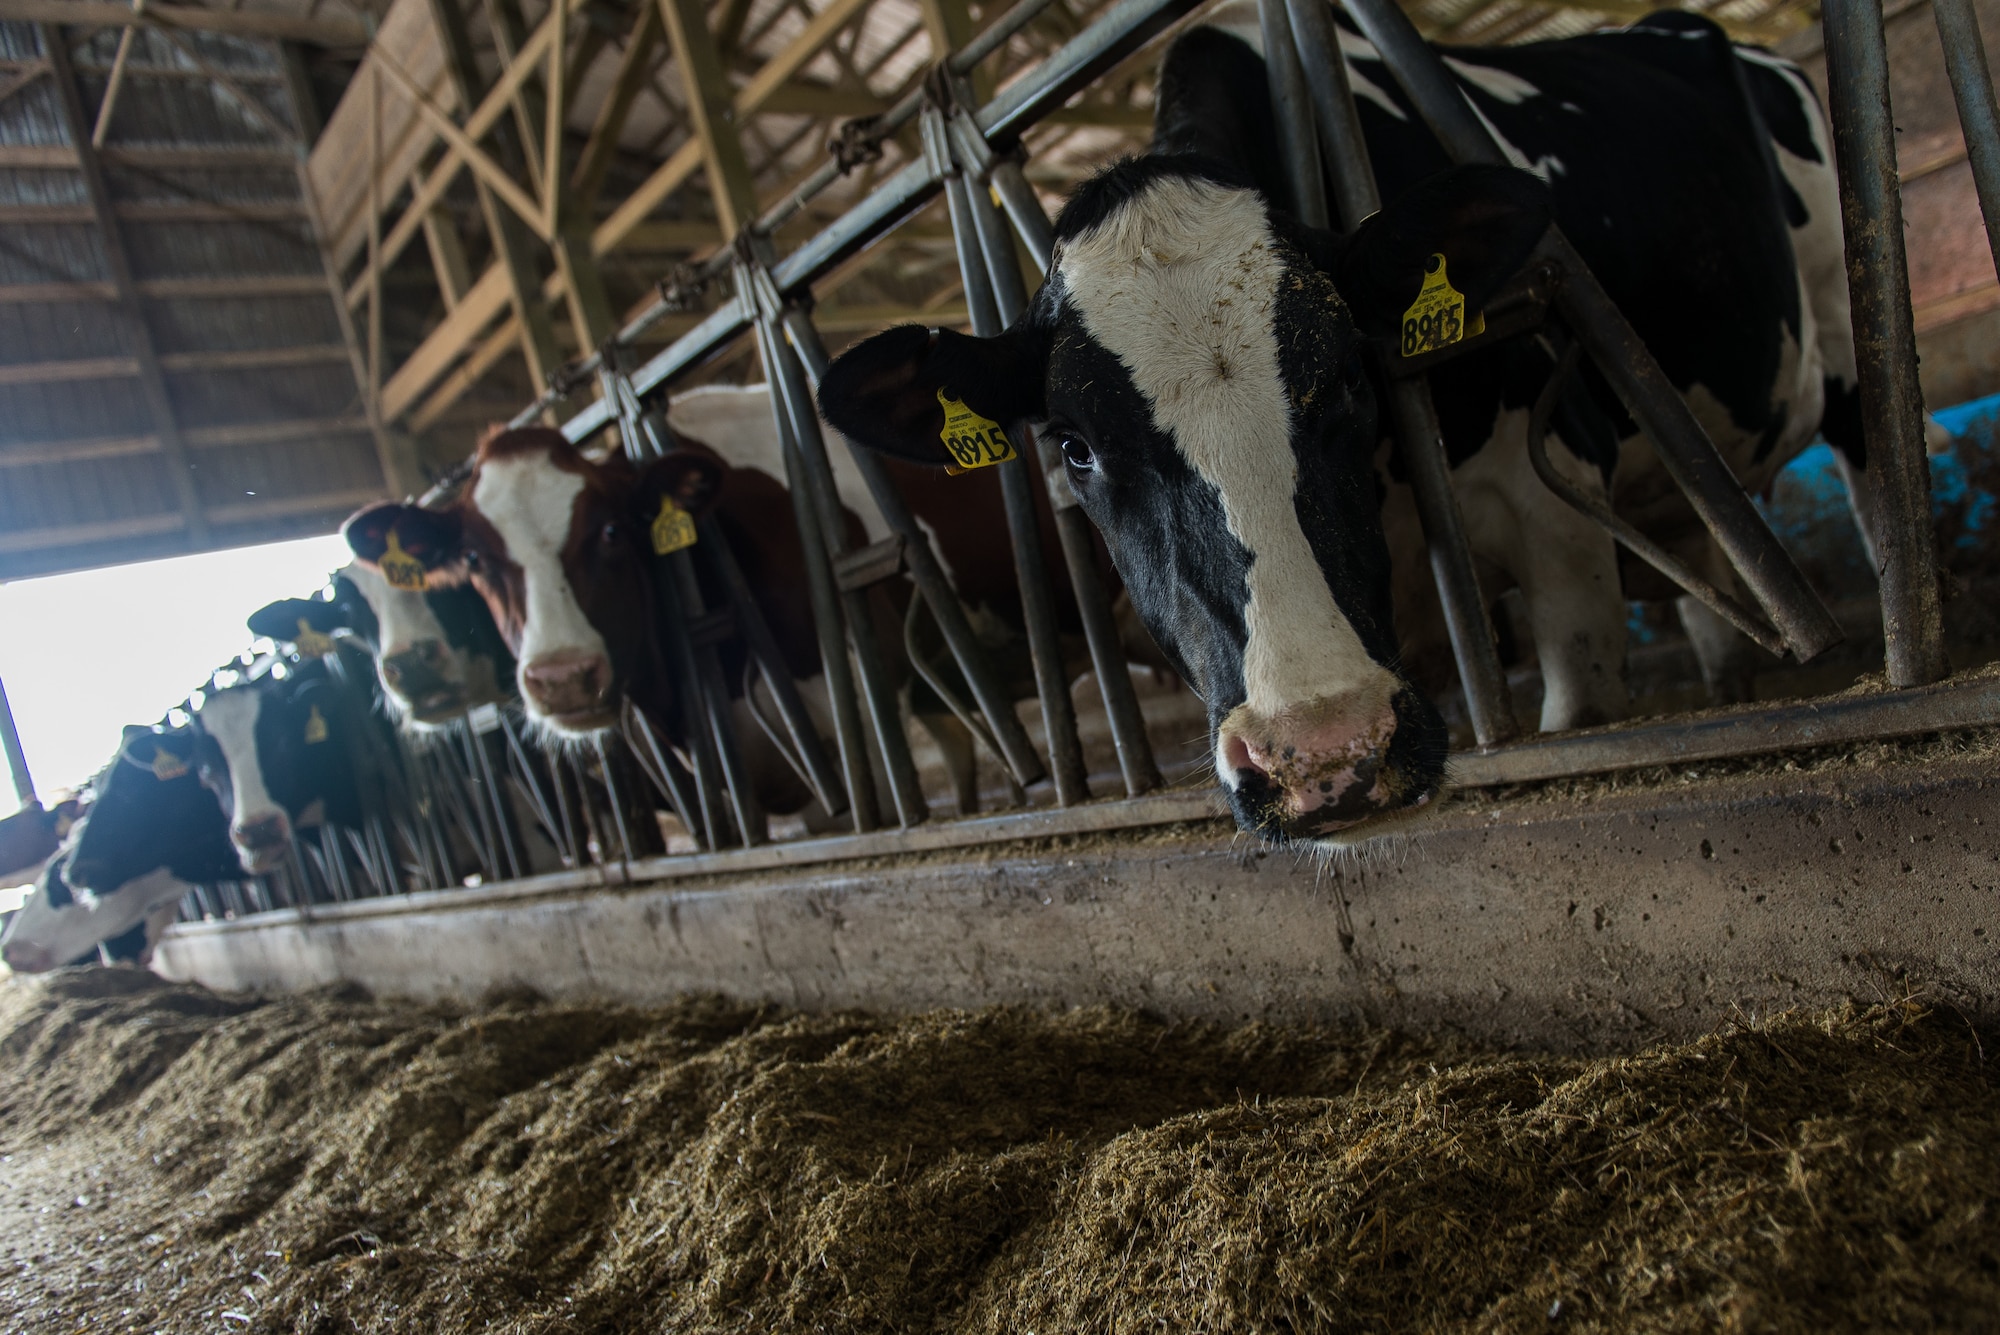 A line of dairy cows await a meal at Lohmann Farms in Perryville, Mo., June 18, 2019. Airmen deployed in support of Delta Area Economic Opportunity Corporation Tri-State Innovative Readiness Training 2019 coordinated with civilian public health agency partners to view livestock processes and promote interagency cooperation. (U.S. Air National Guard photo by Senior Airman Jonathan W. Padish)